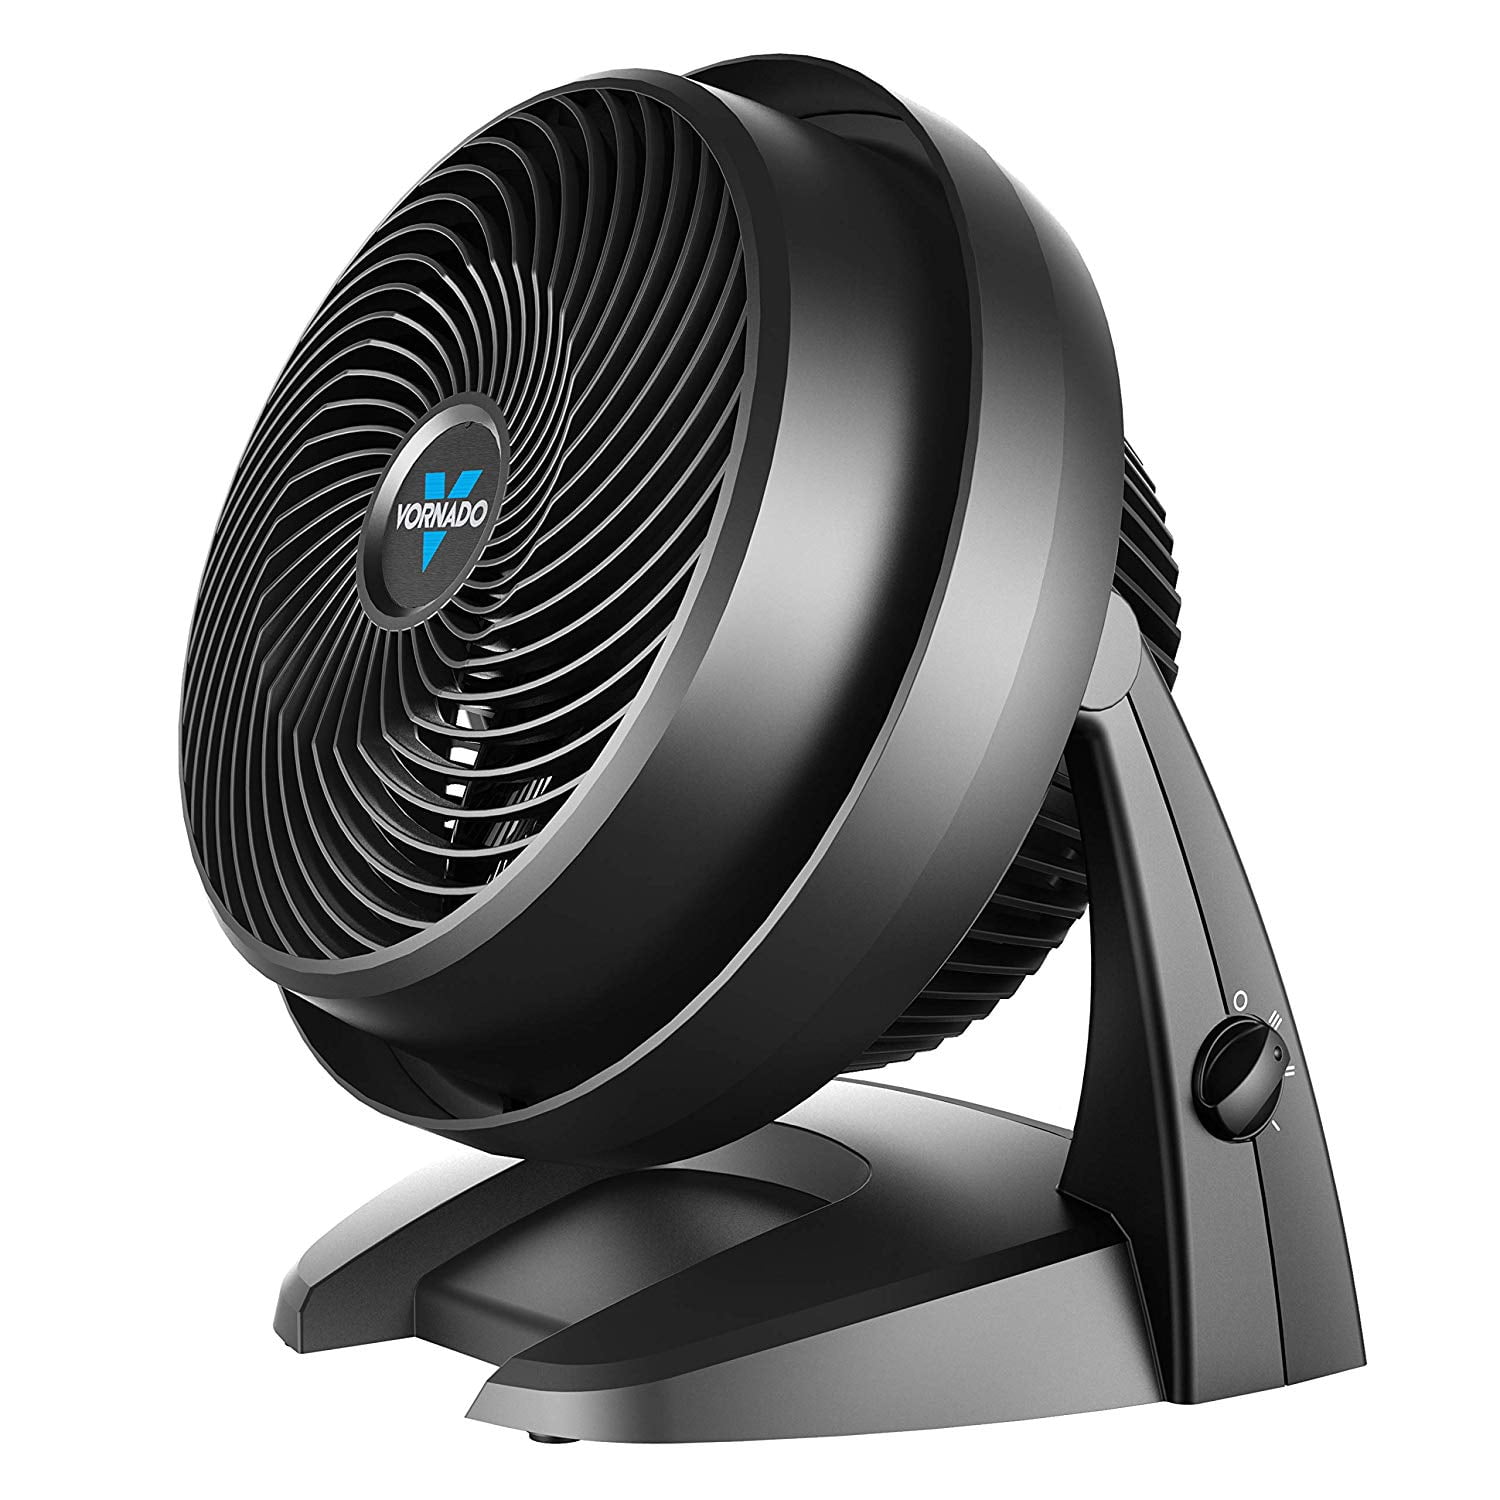 Vornado Whisper Quiet Large Air Fan with Airflow and 3 Speed Control